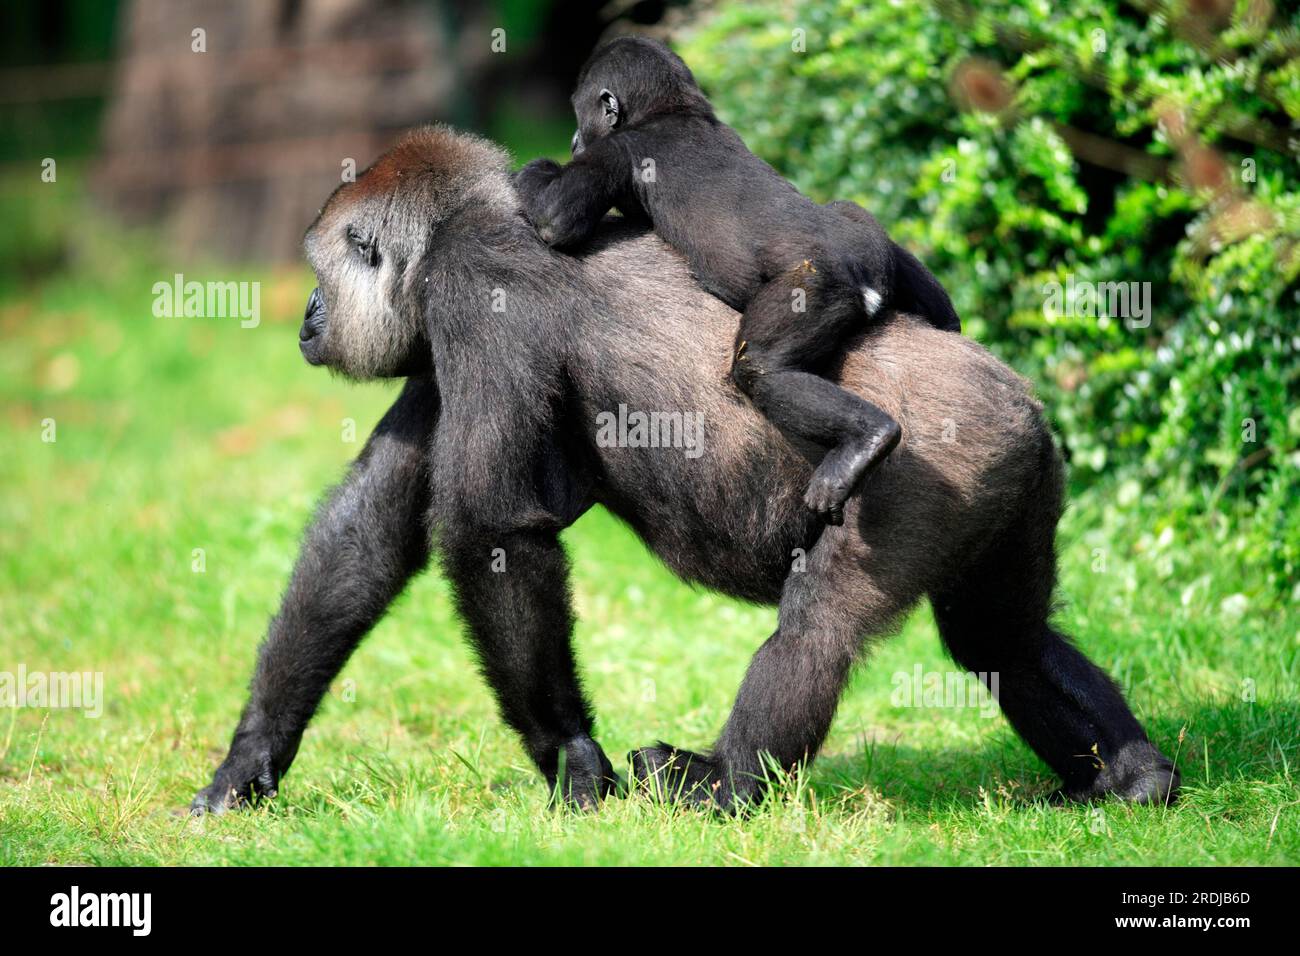 Western lowland western gorilla (Gorilla gorilla), female, with young, on back, young riding on its mother's back Lowland gorilla, Gorilla gorilla Stock Photo